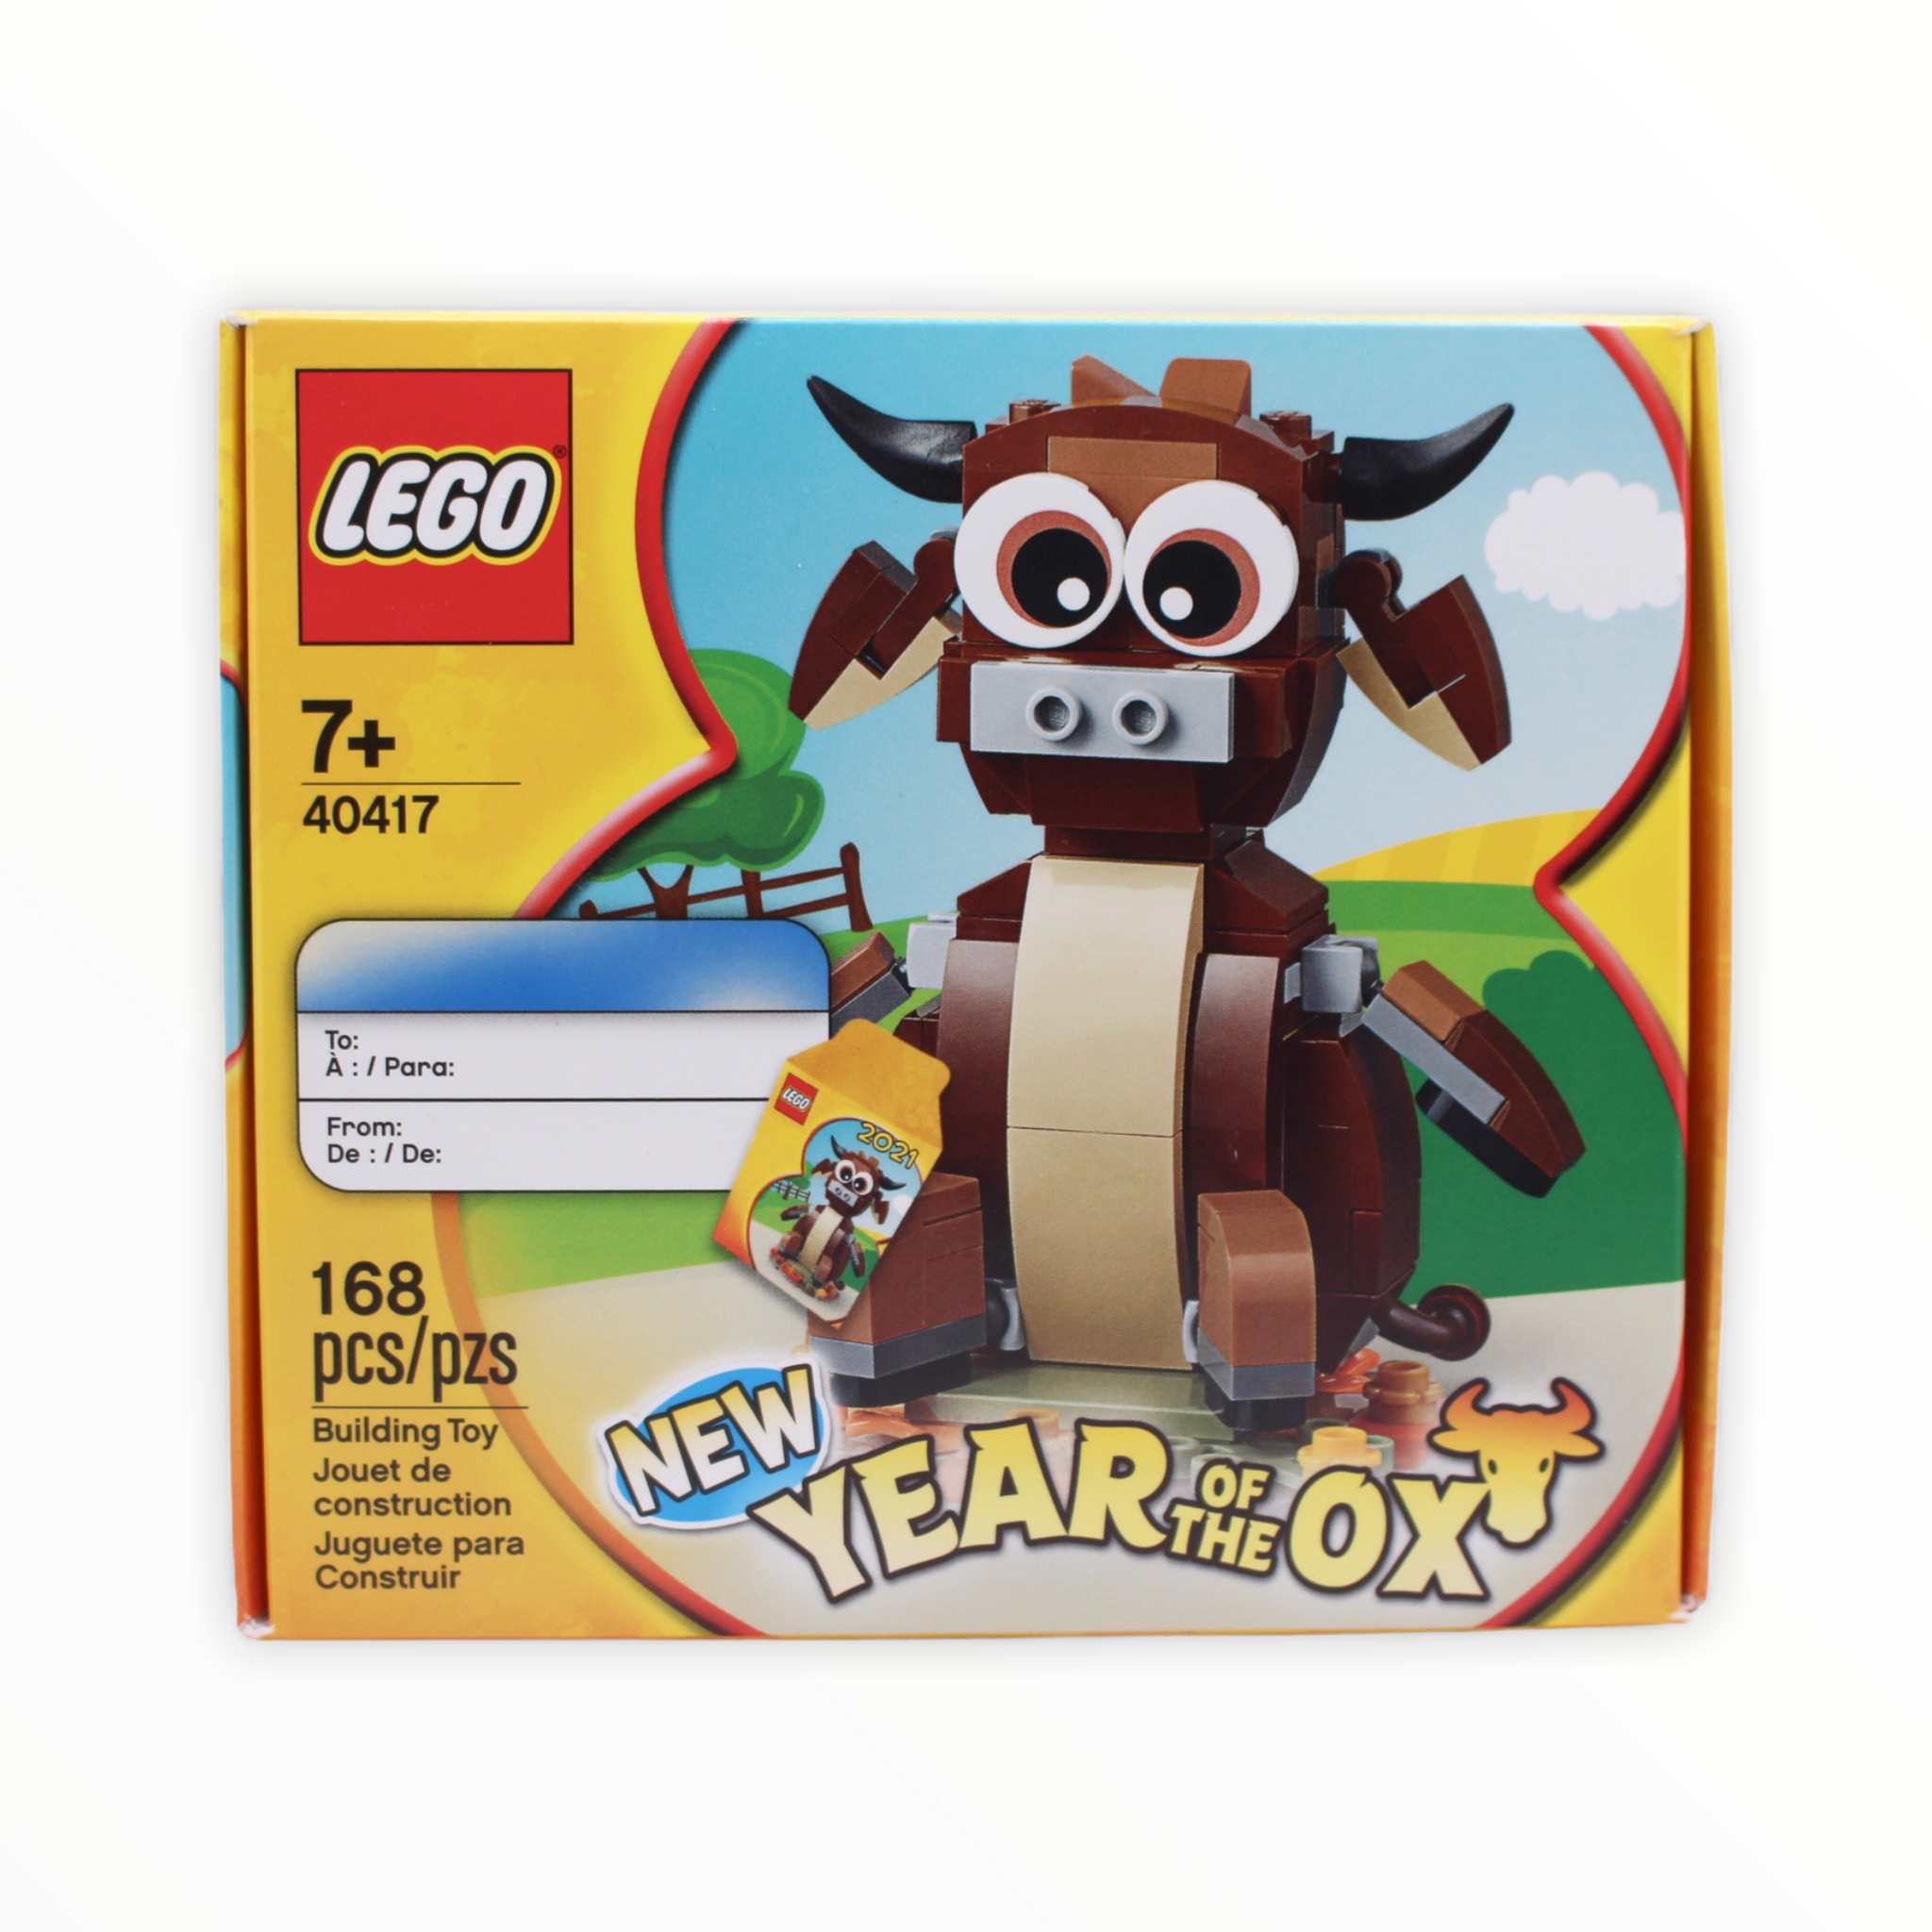 Certified Used Set 40417 LEGO Year of the Ox (2021)